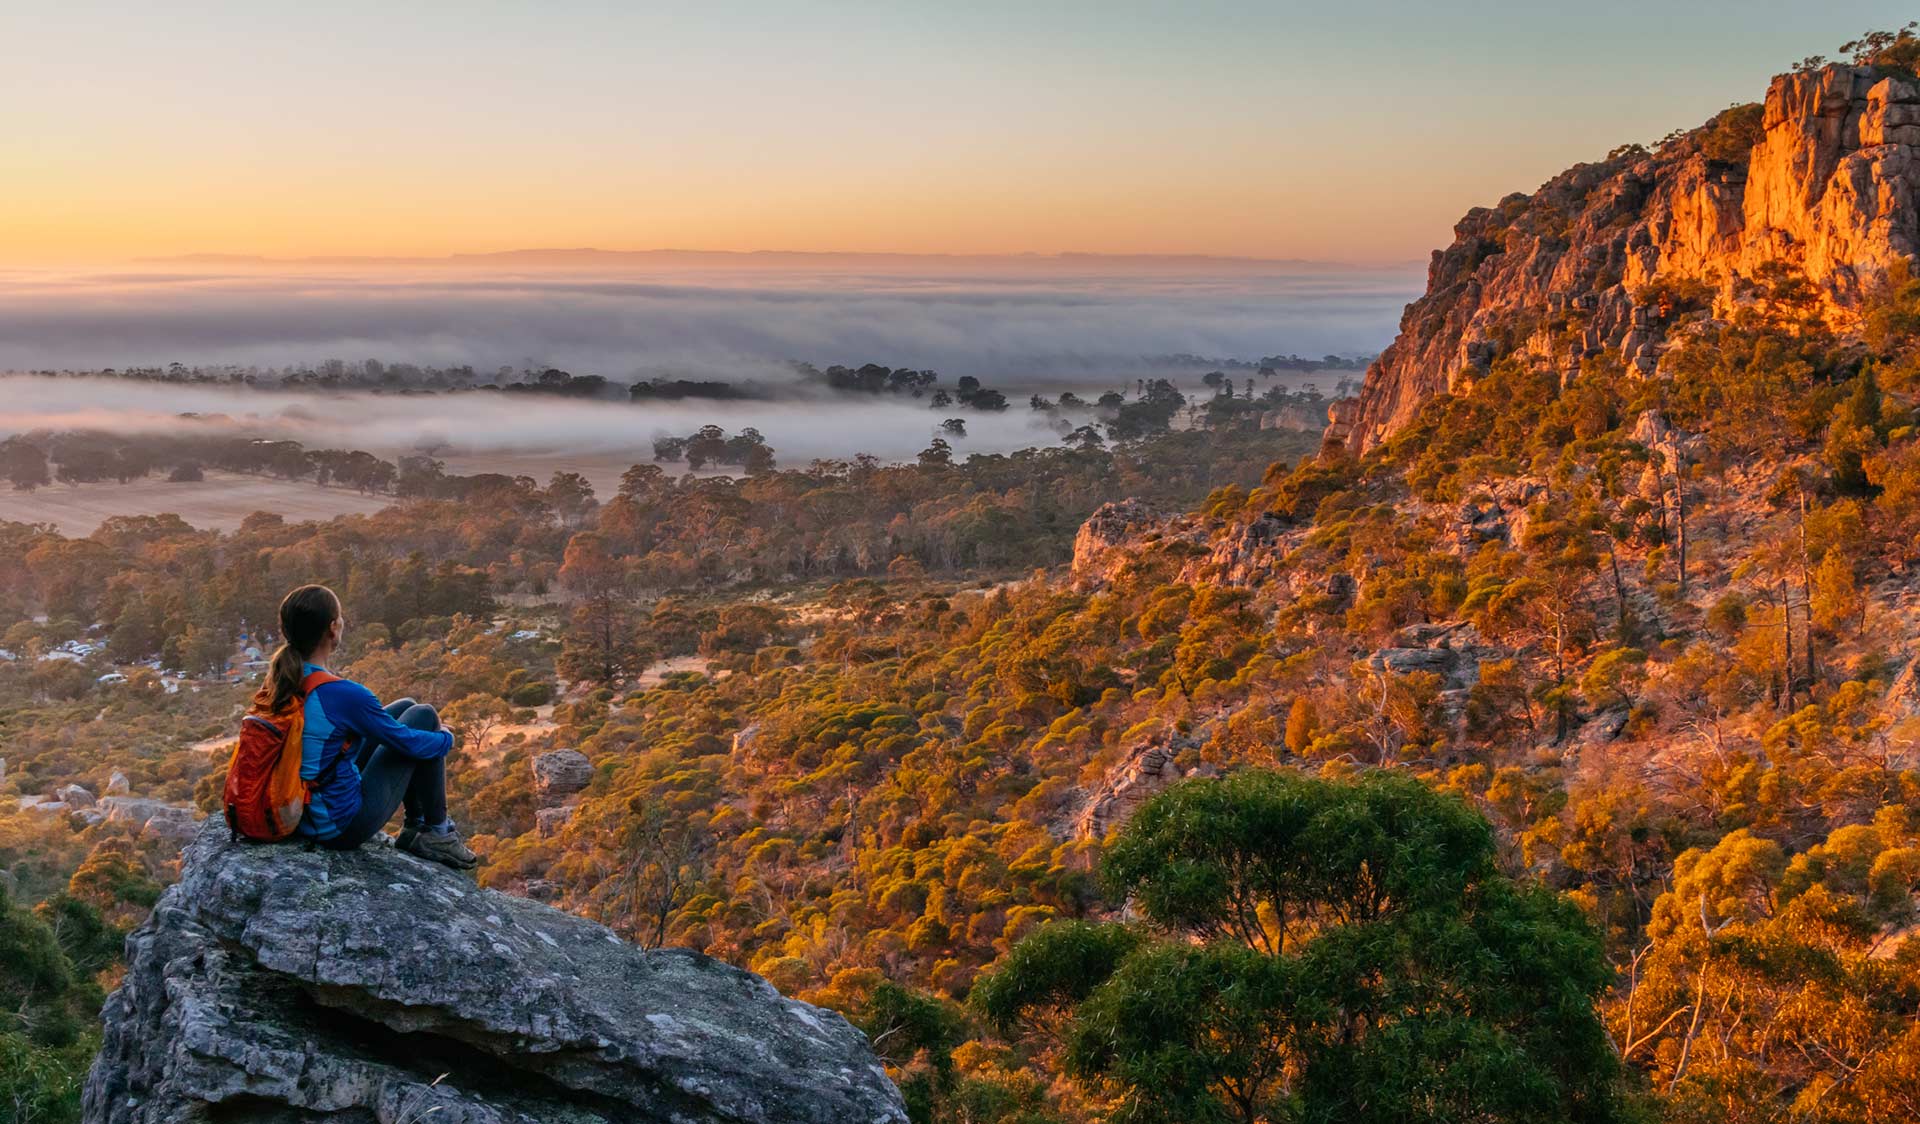 A walker stops to take in the sunrise at Mt Arapiles.